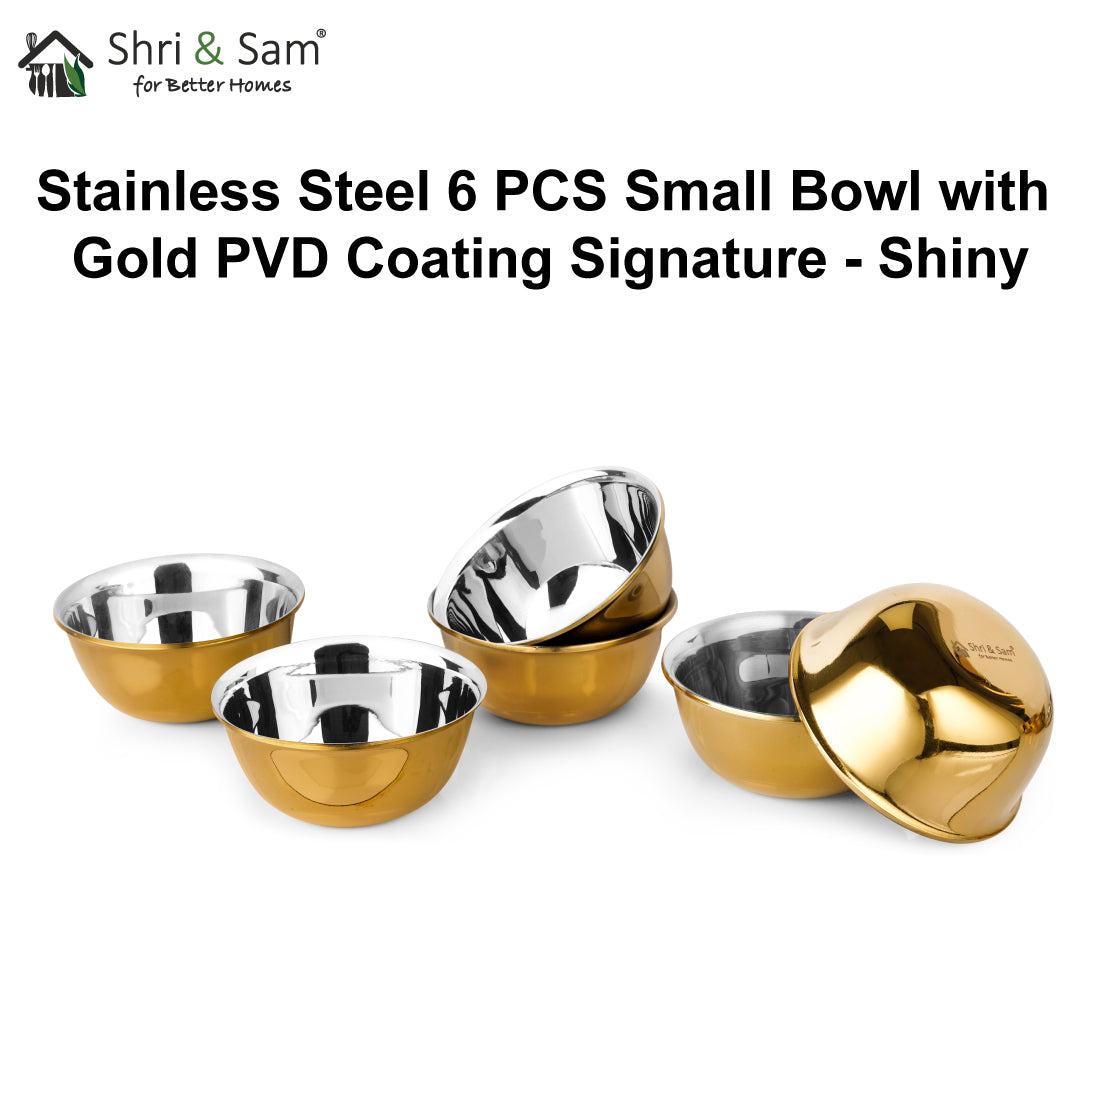 Stainless Steel 6 PCS Small Bowl with Gold PVD Coating Signature - Shiny